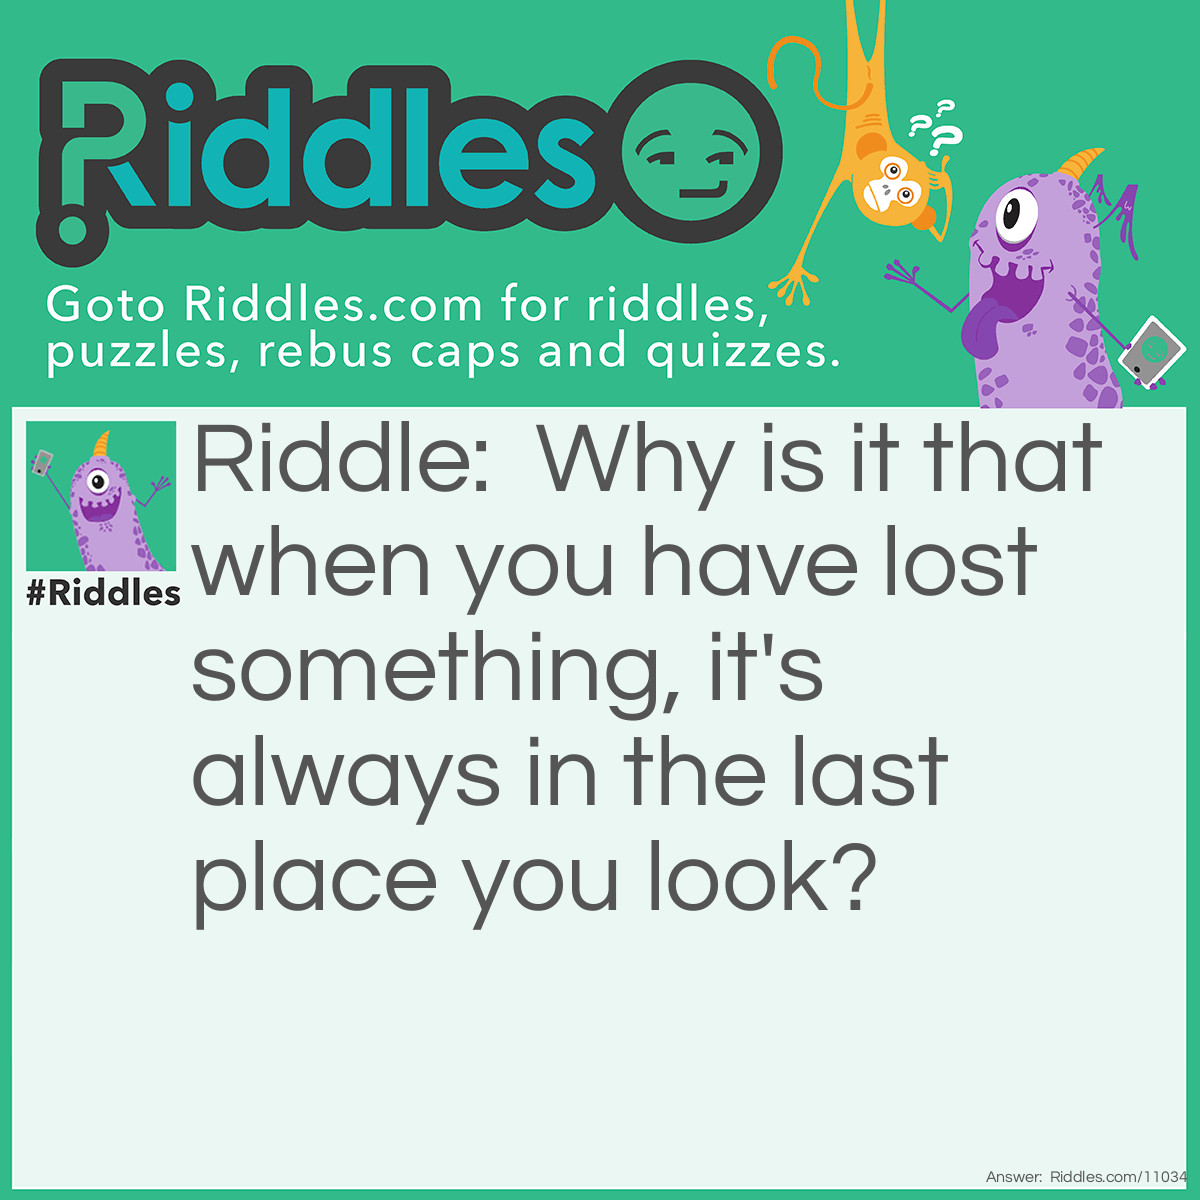 Riddle: Why is it that when you have lost something, it's always in the last place you look? Answer: Because you stop looking when you find it.